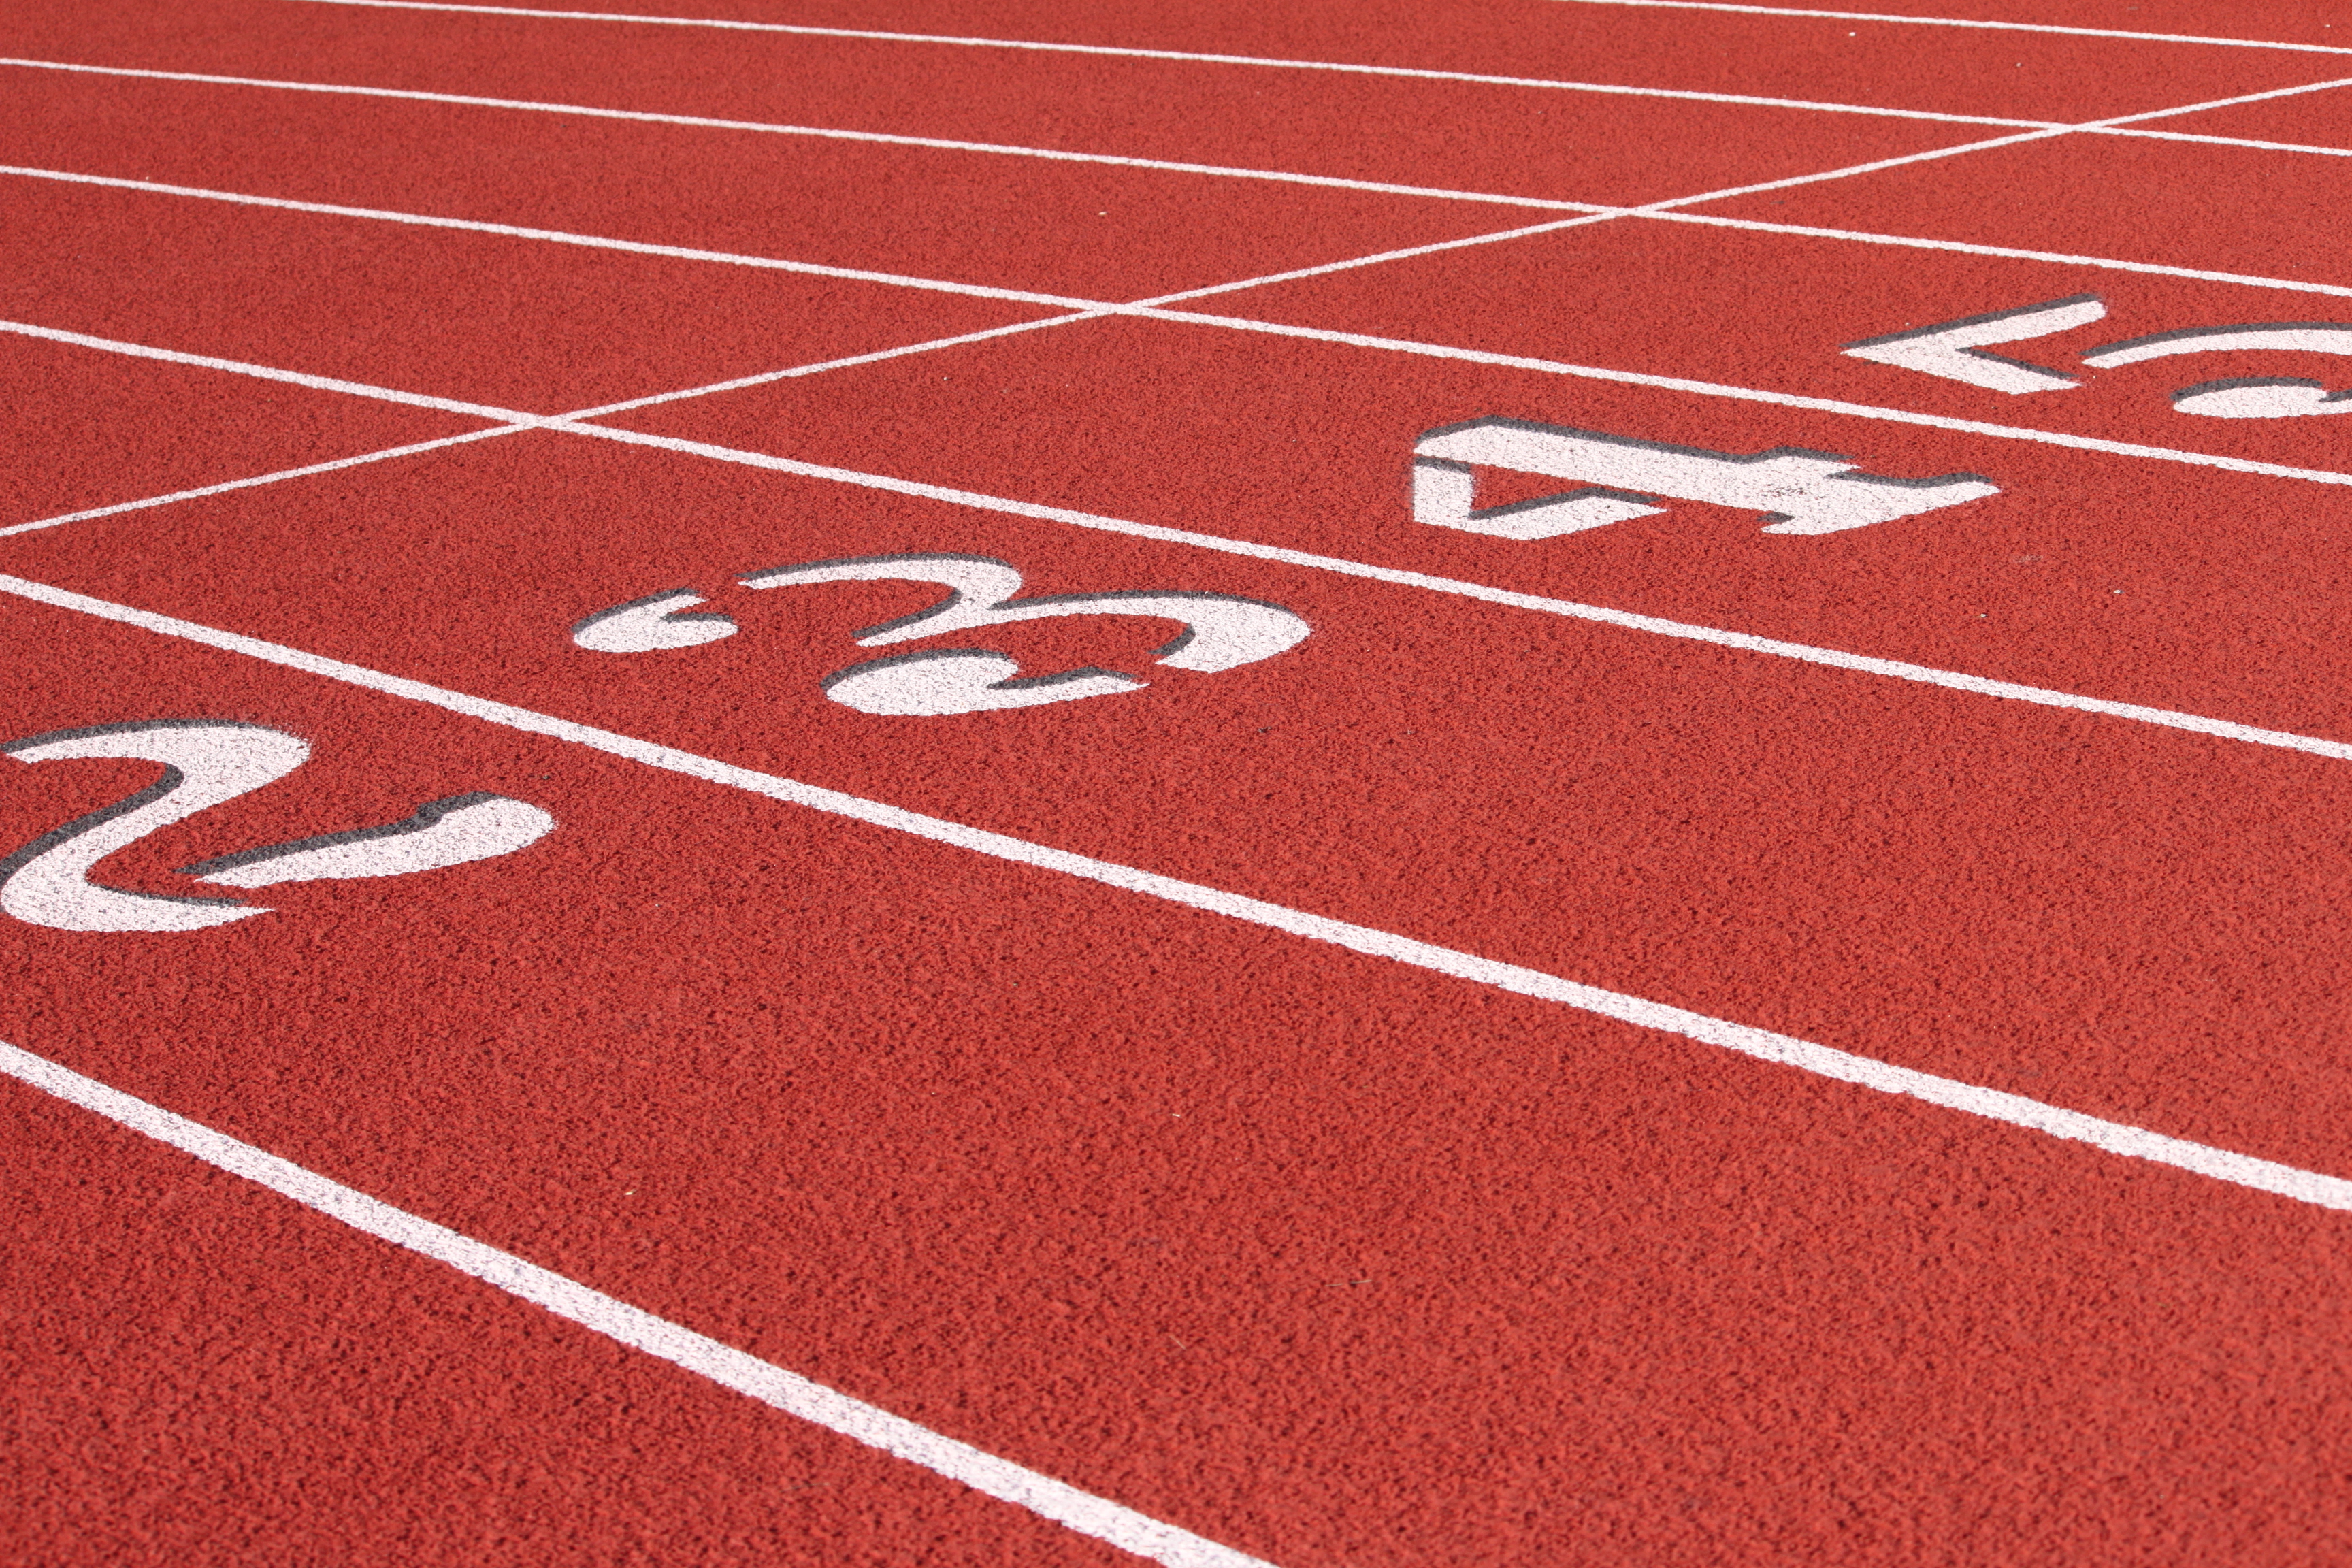 track and field wallpaper,race track,track and field athletics,sport venue,lane,line